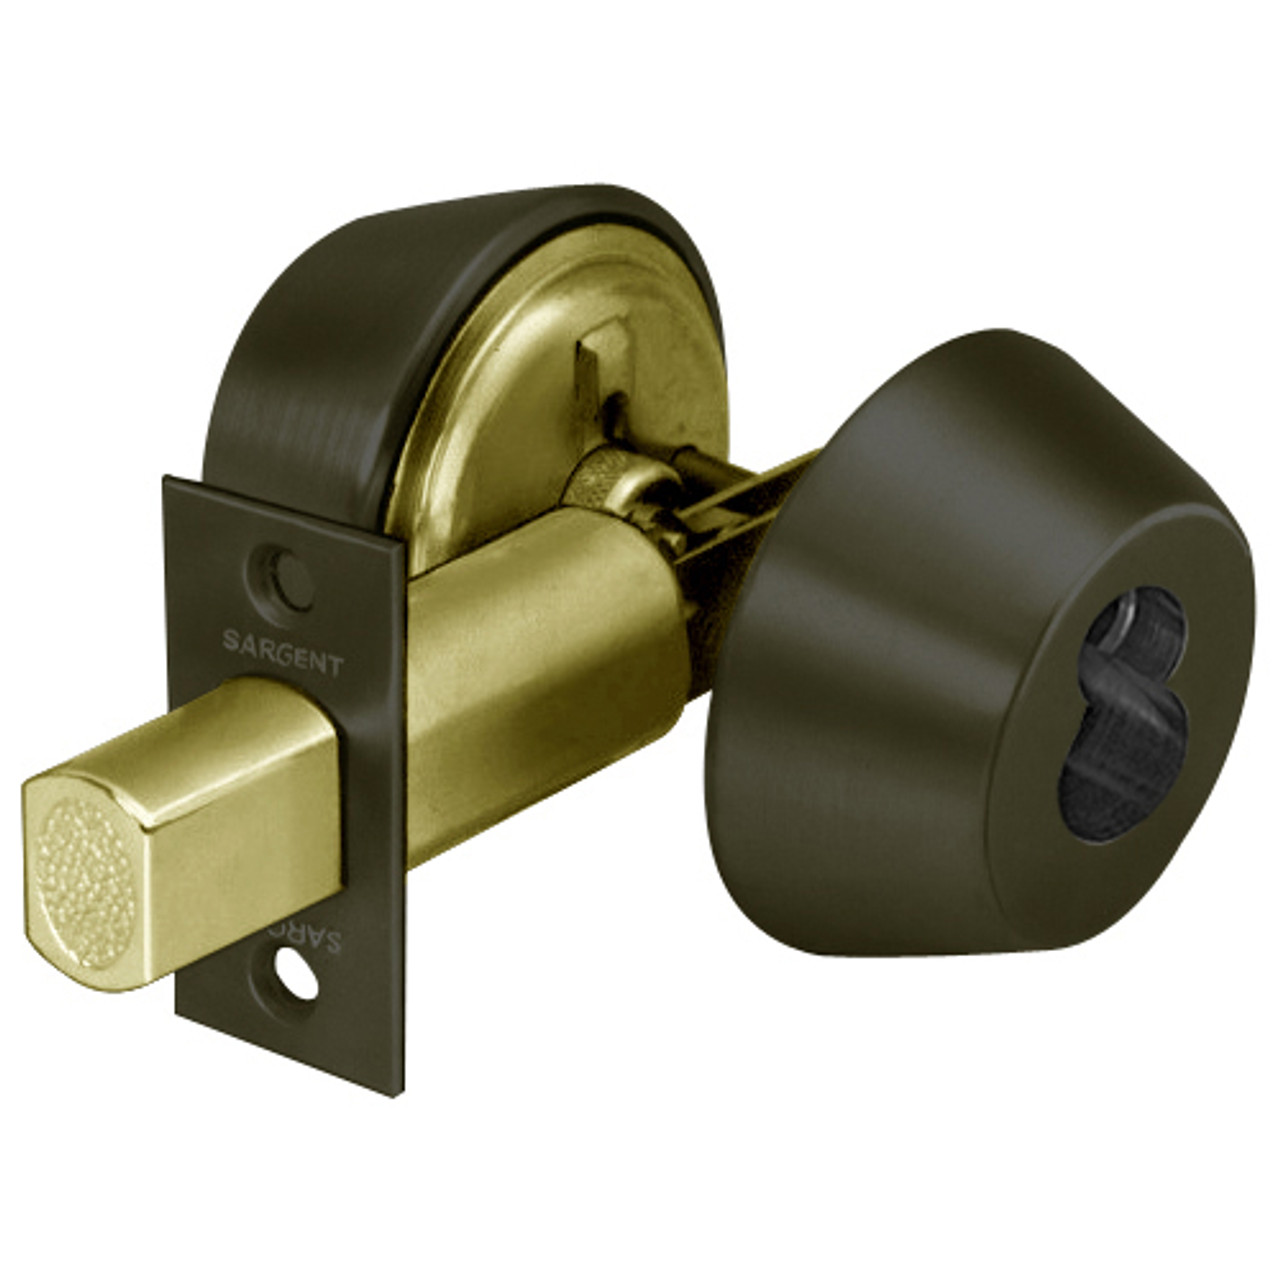 60-484-10B Sargent 480 Series Double Cylinder Auxiliary Deadbolt Lock Prepped for LFIC in Oil Rubbed Bronze